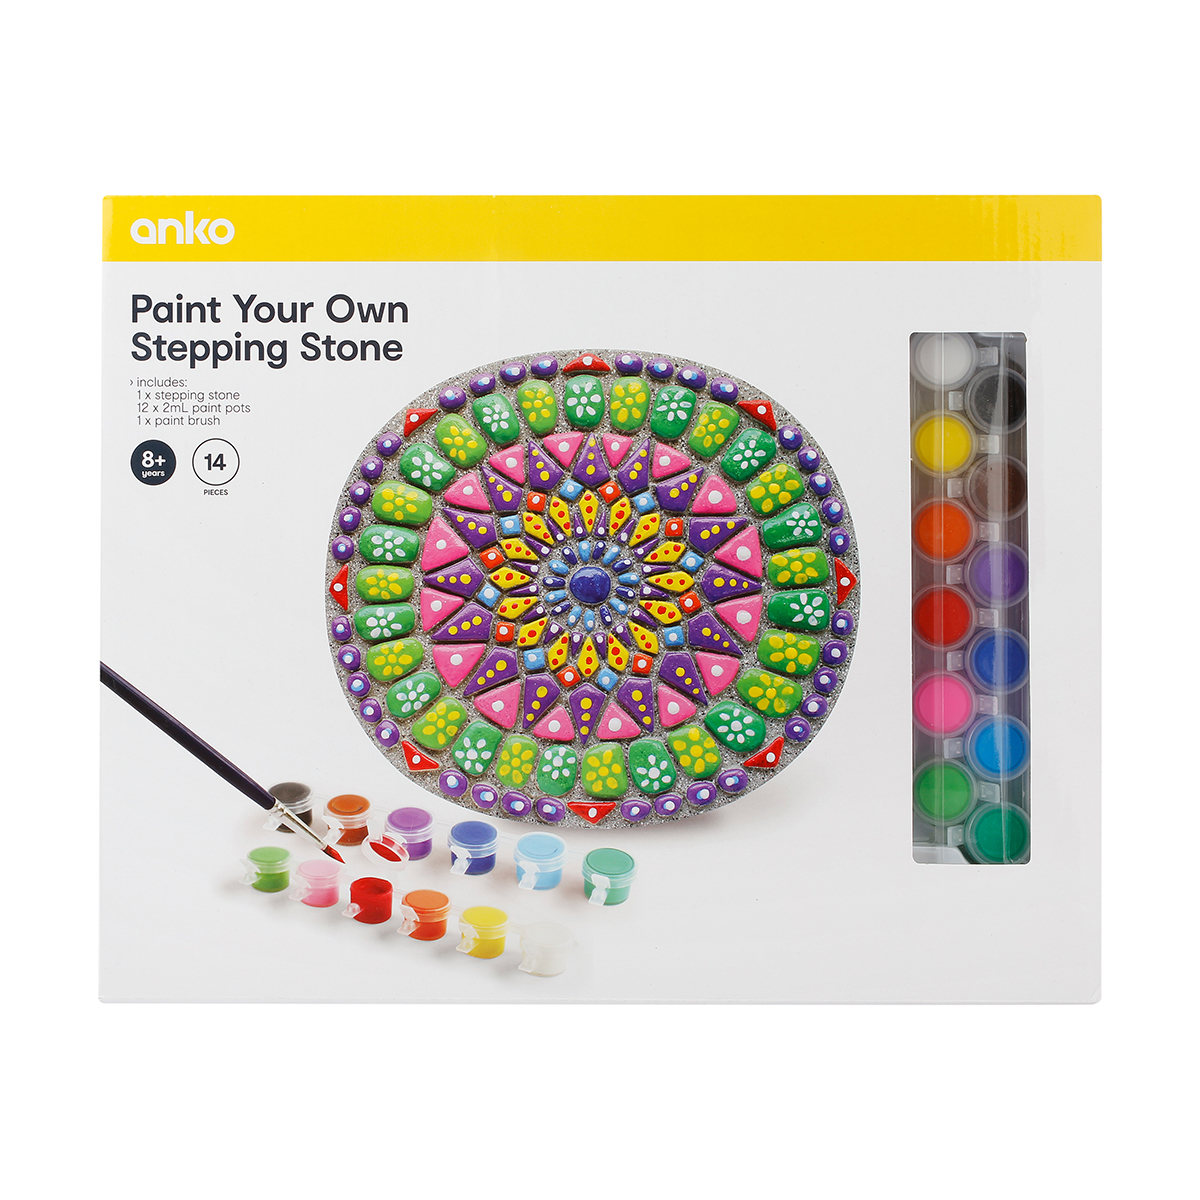 14 Piece Paint Your Own Stepping Stone Set